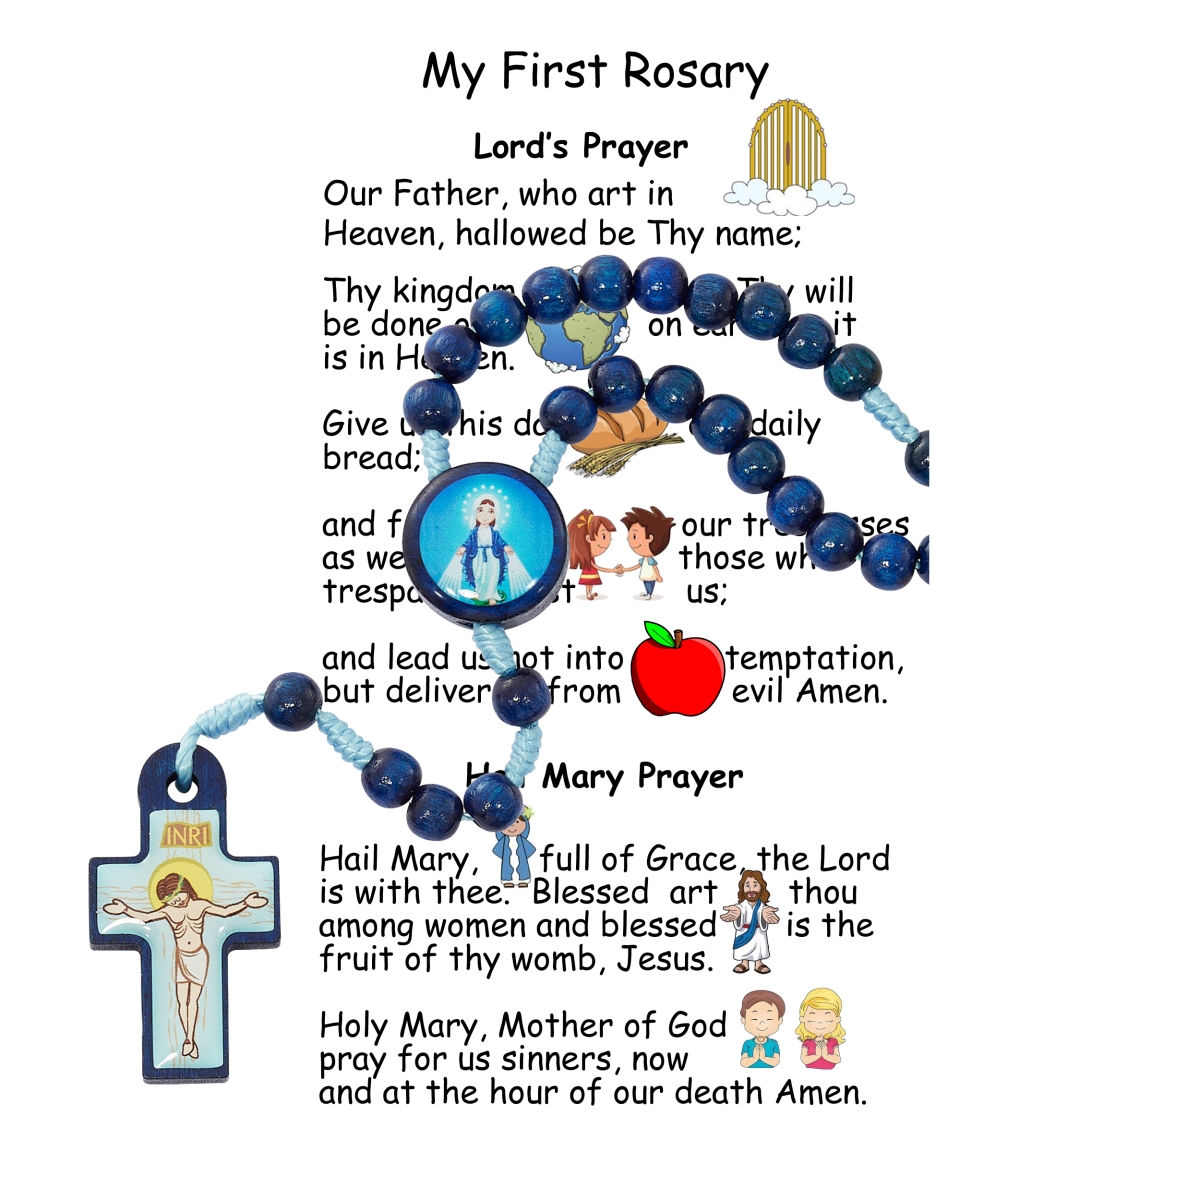 McVan P588RC 10 in. Blue Wood Kiddee Miraculous Rosary On First Rosary Card